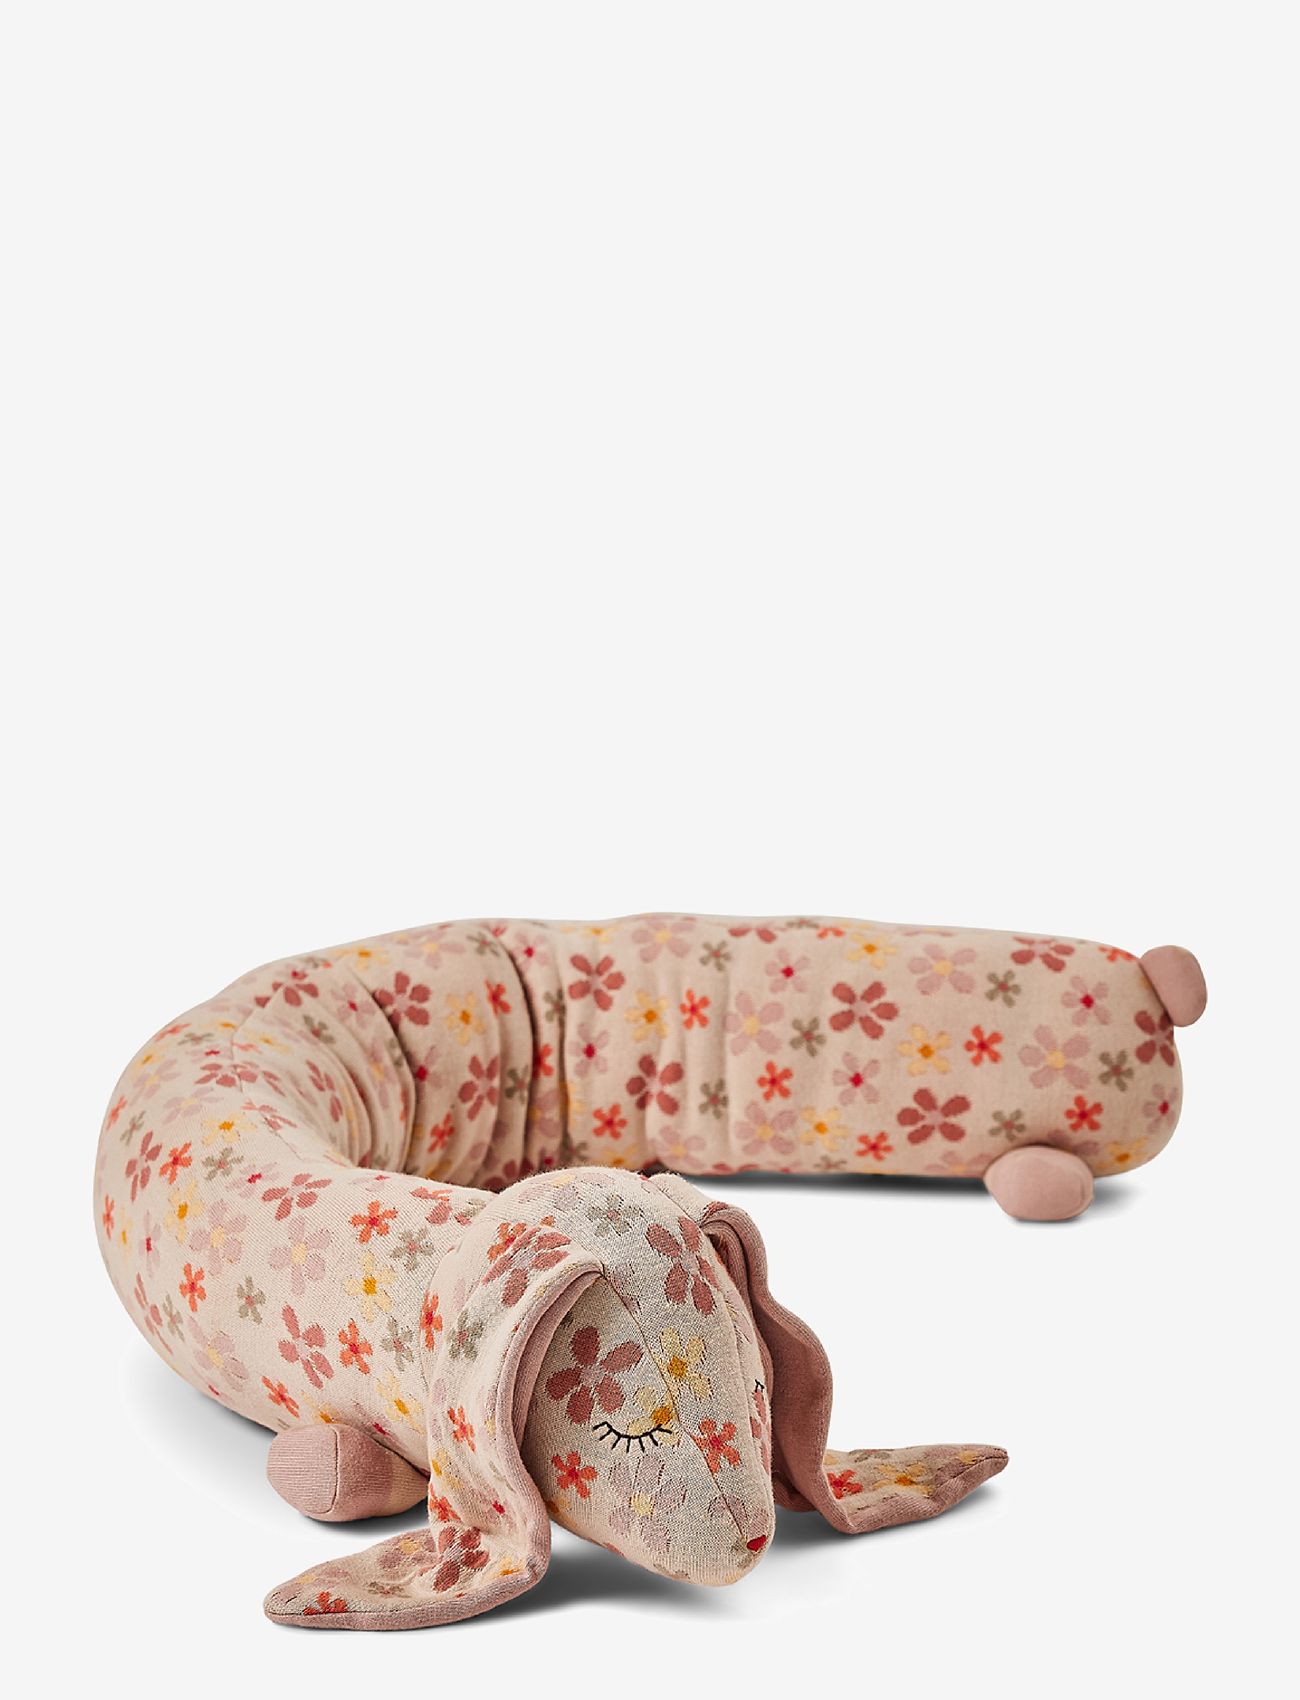 Smallstuff - Bed animal, rabbit with flowers, rose peach - bed bumper - rose - 0